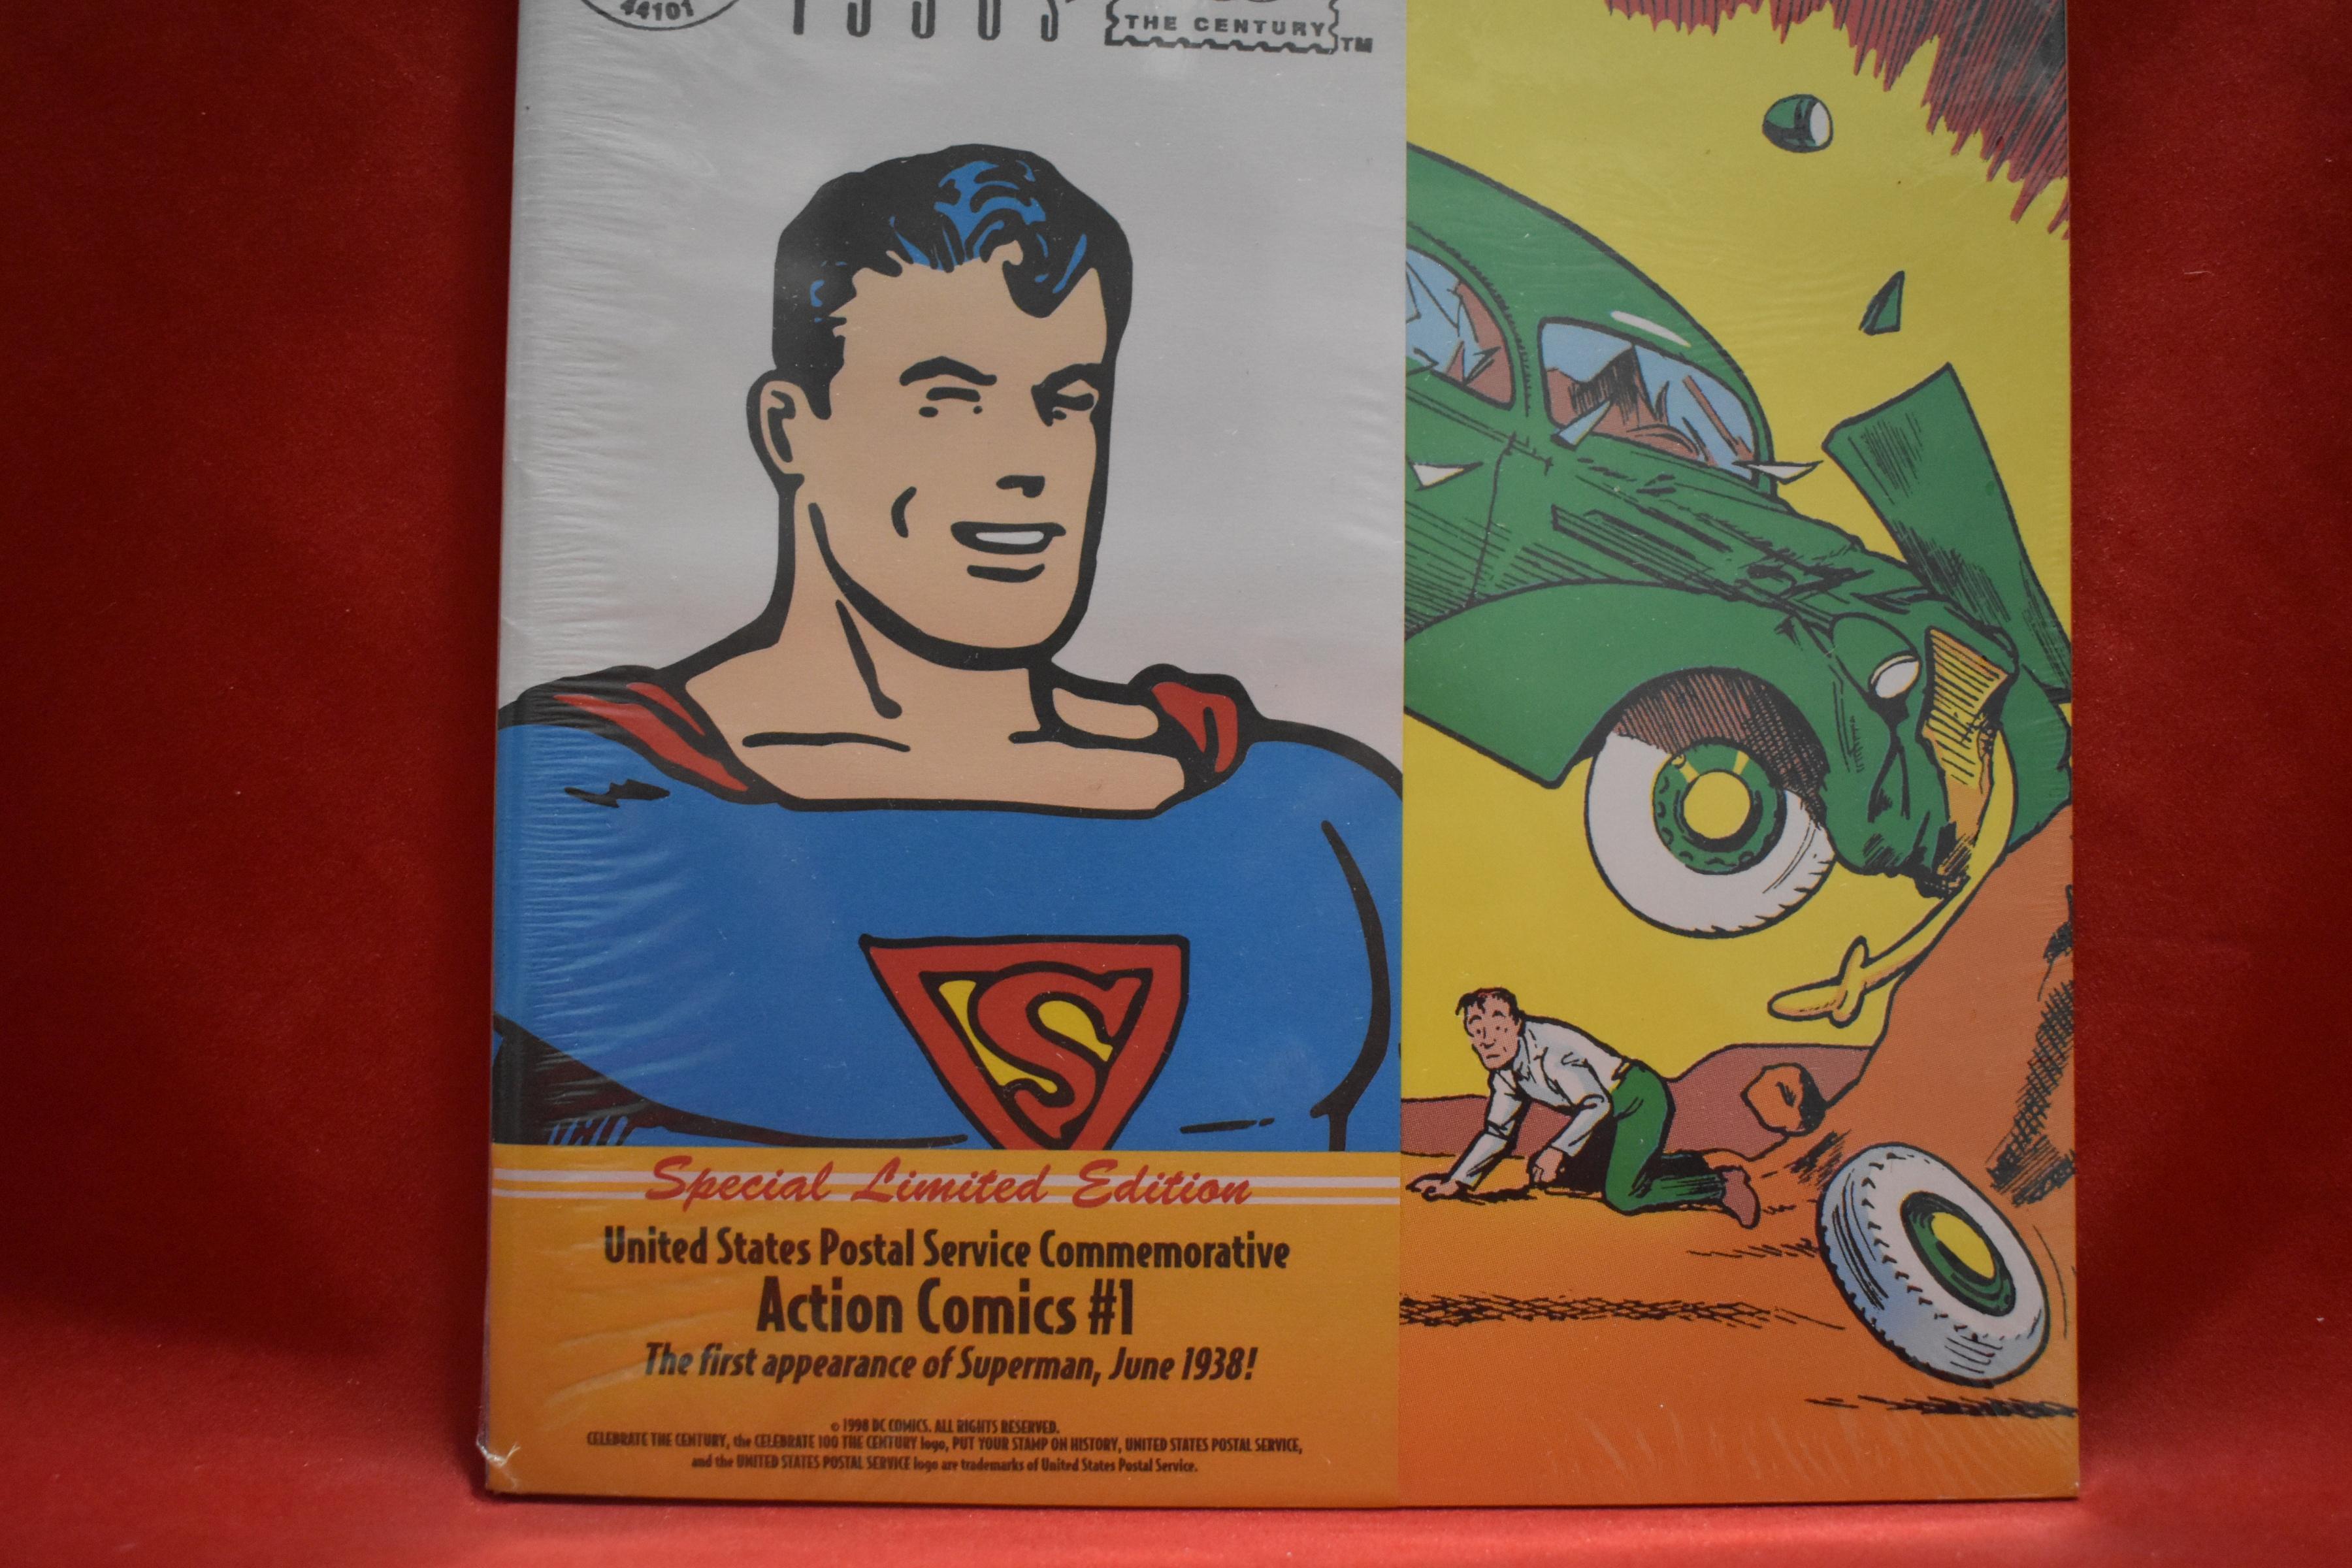 ACTION COMICS #1 | COMMERATIVE USPS ISSUE - SEALED